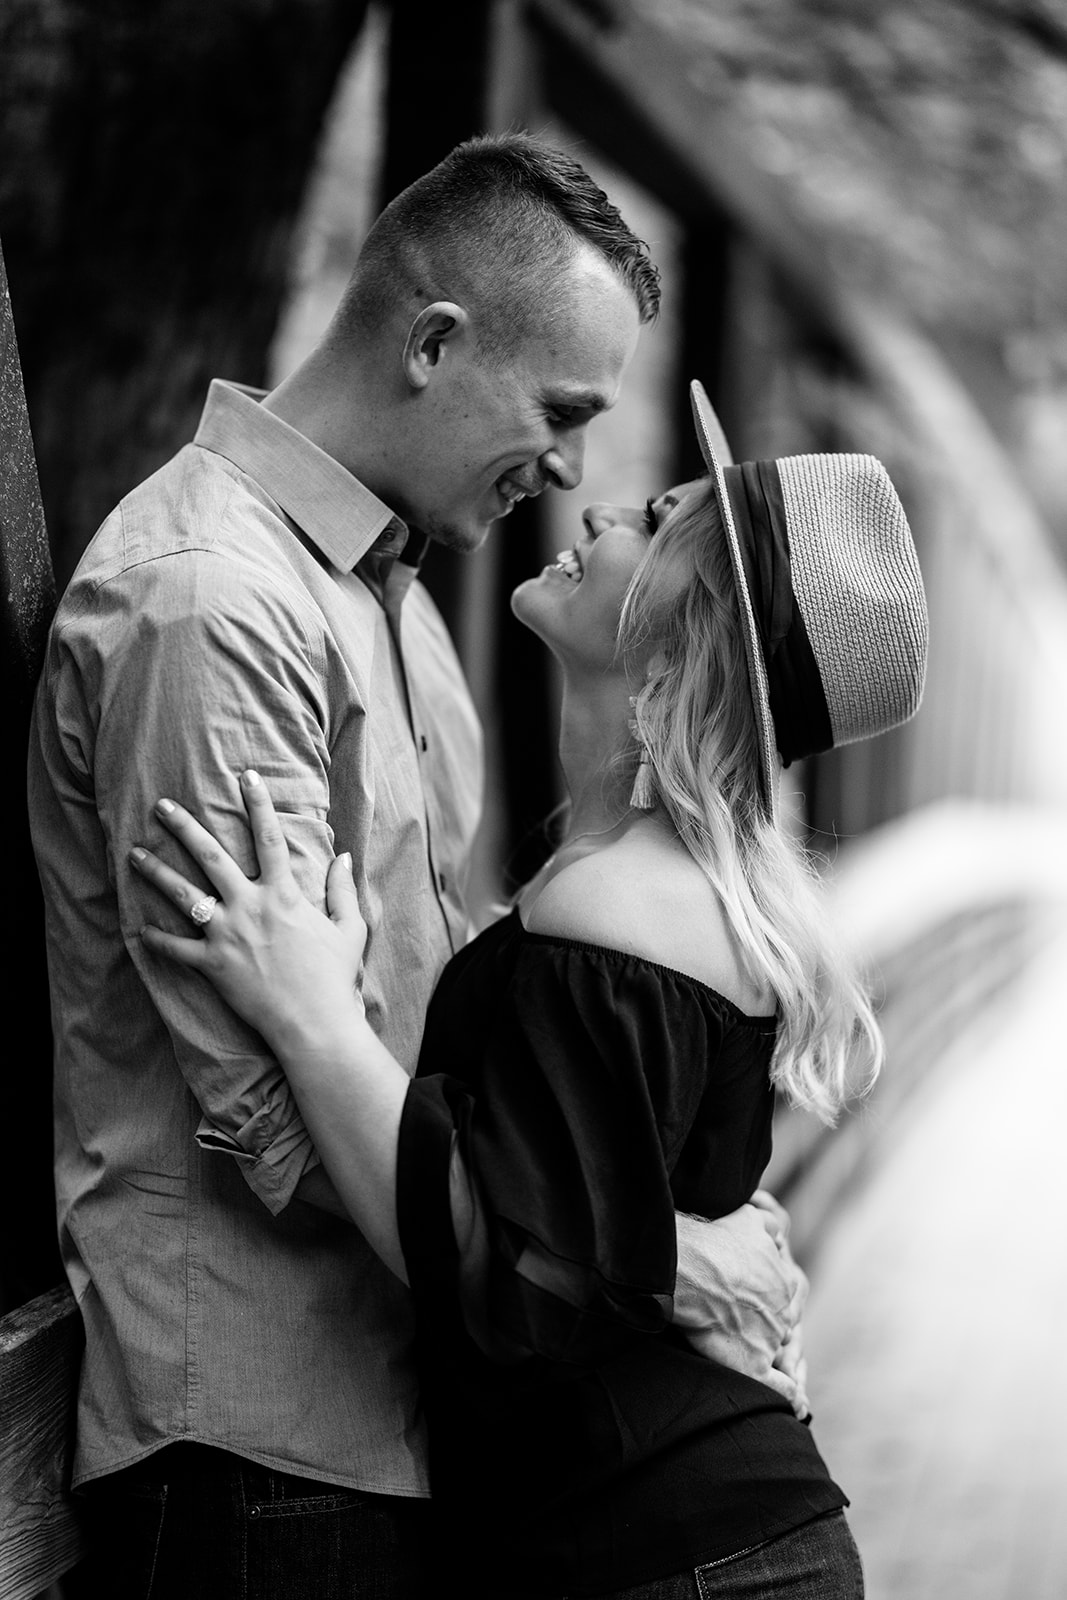 Two newly engaged individuals share a moment of joy and affection, gazing into each other's eyes with bright smiles. The woman wears a stylish hat, adding a touch of charm to the scene as they bask in the happiness of their commitment to each other.